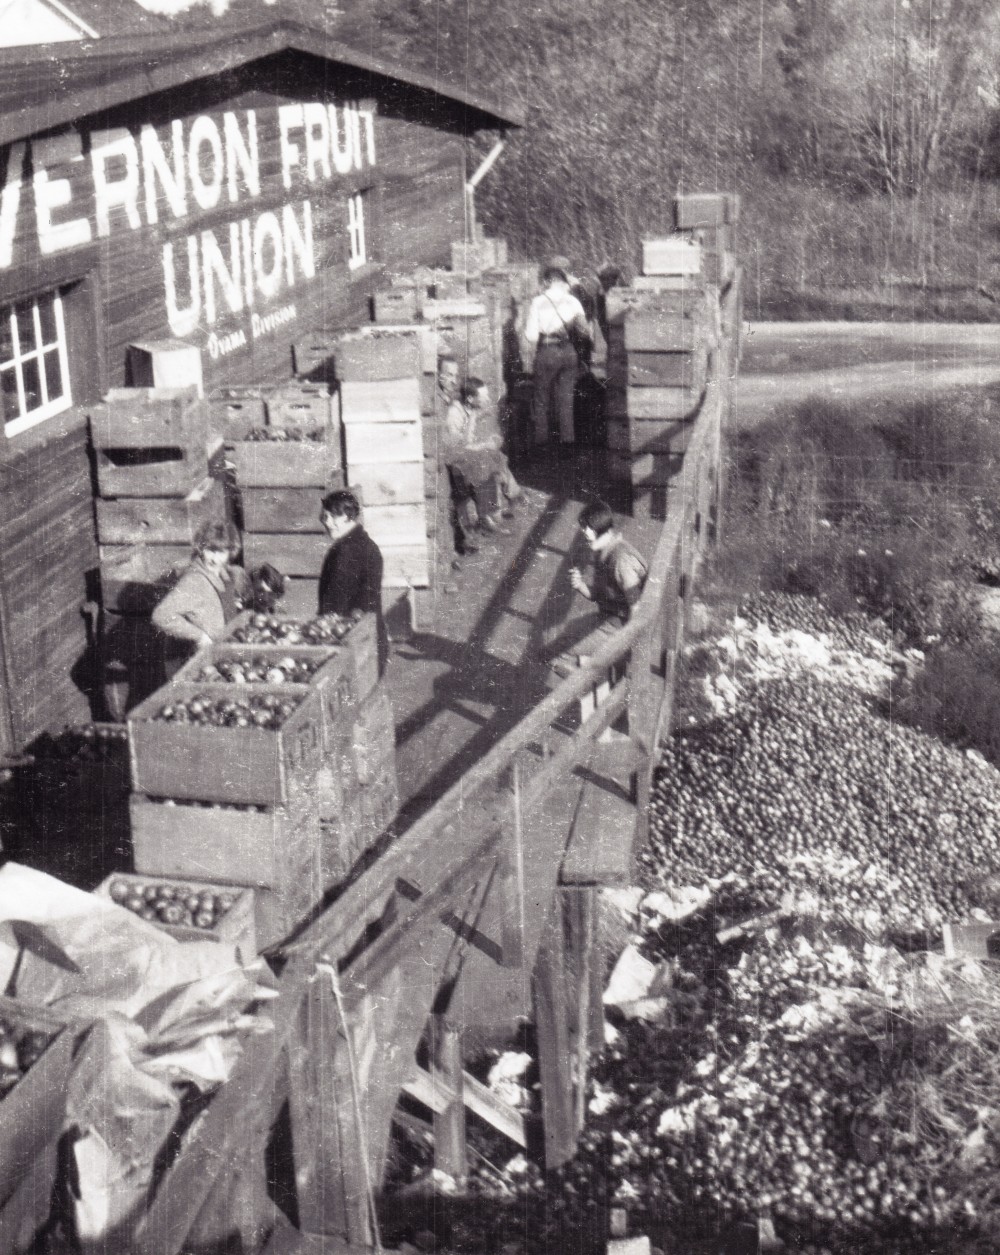 Black and white photo of a wooden building with the words "Vernon Fruit Union II, Oyama Division" painted on its side. There are nine men and women and many boxes of apples on an outside upper deck. Below the deck, thousands of apples lie in piles on the ground.